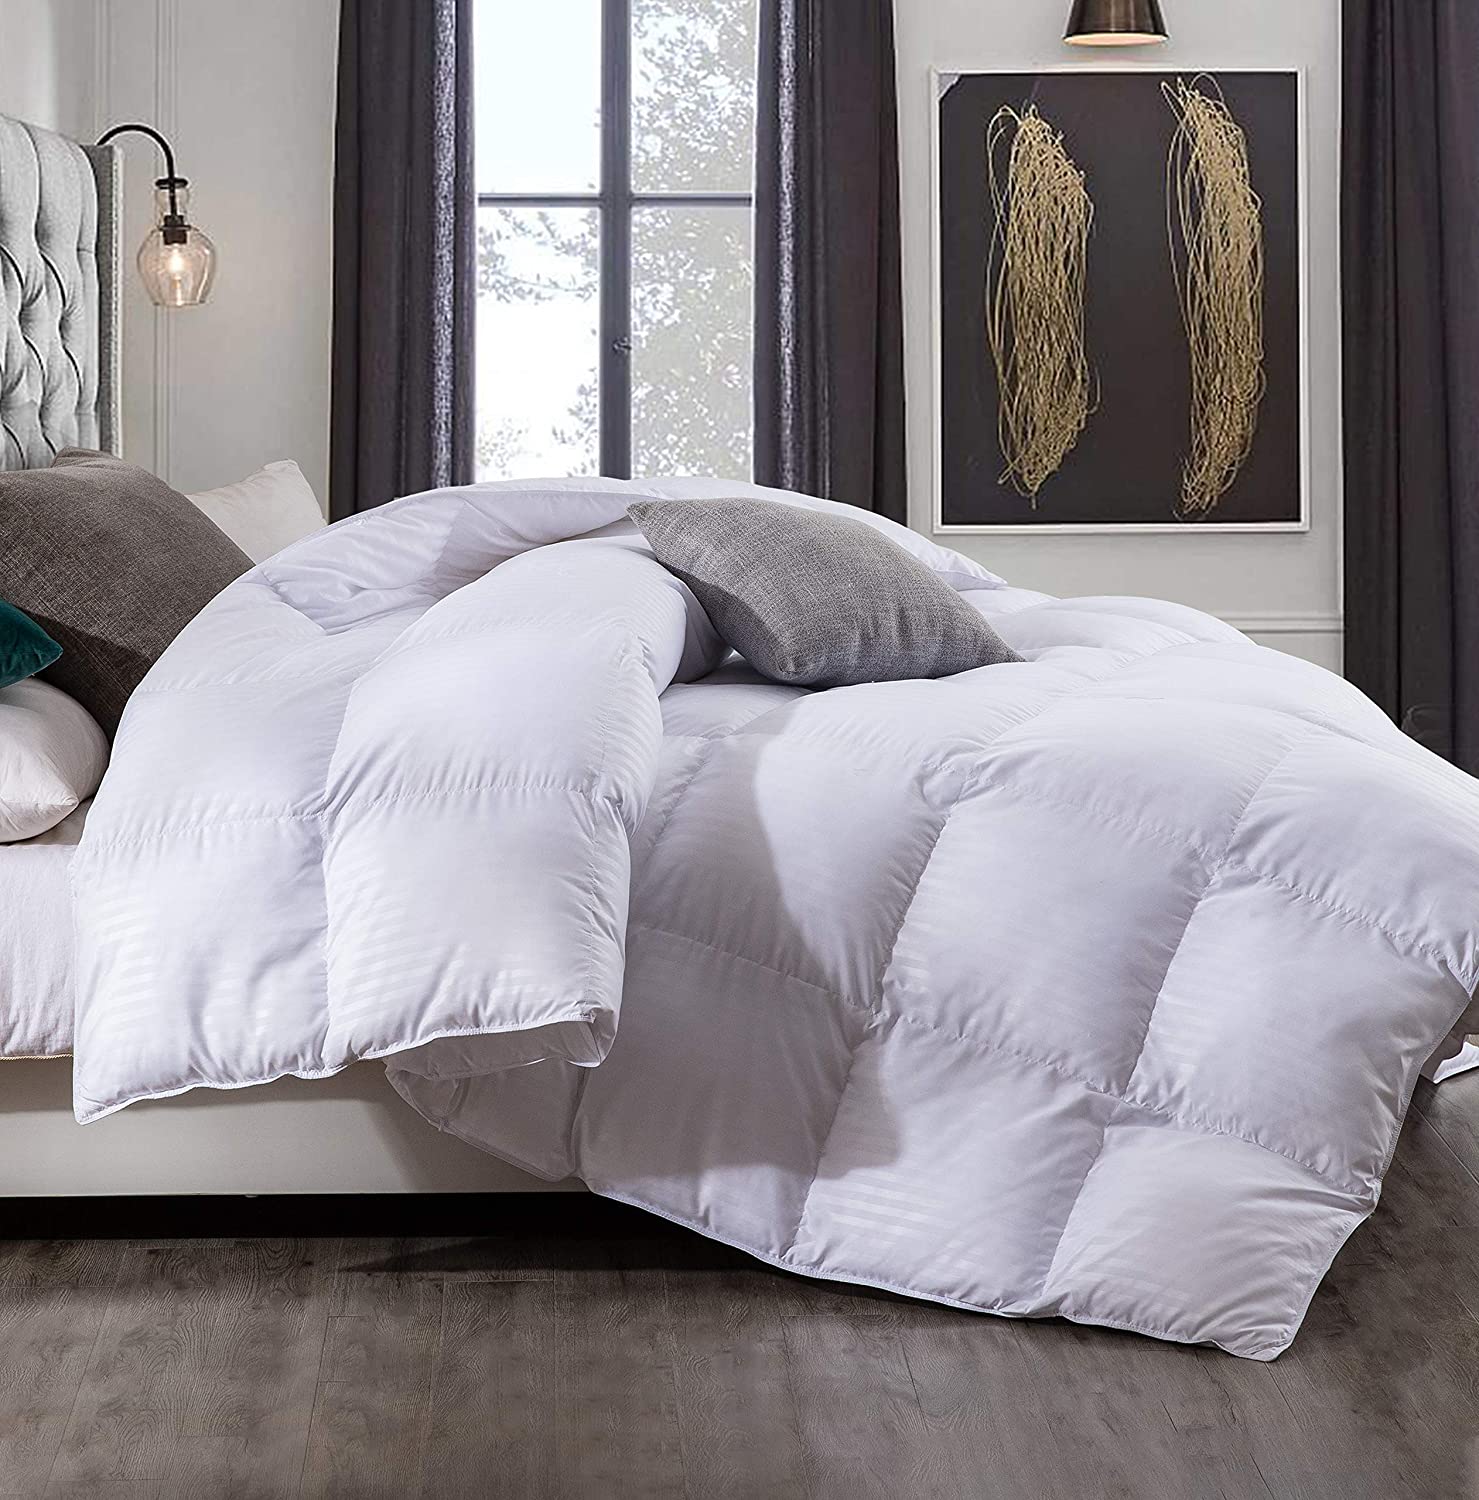 Price:$41.99  Comforters for King Bed All Season Quilted Down Alternative Bedding Comforter,Duvet Insert with Corner Tabs,Breathable Microfiber Filling,Lightweight&Medium Warmth(King Size,106x90 inches) : Home & Kitchen